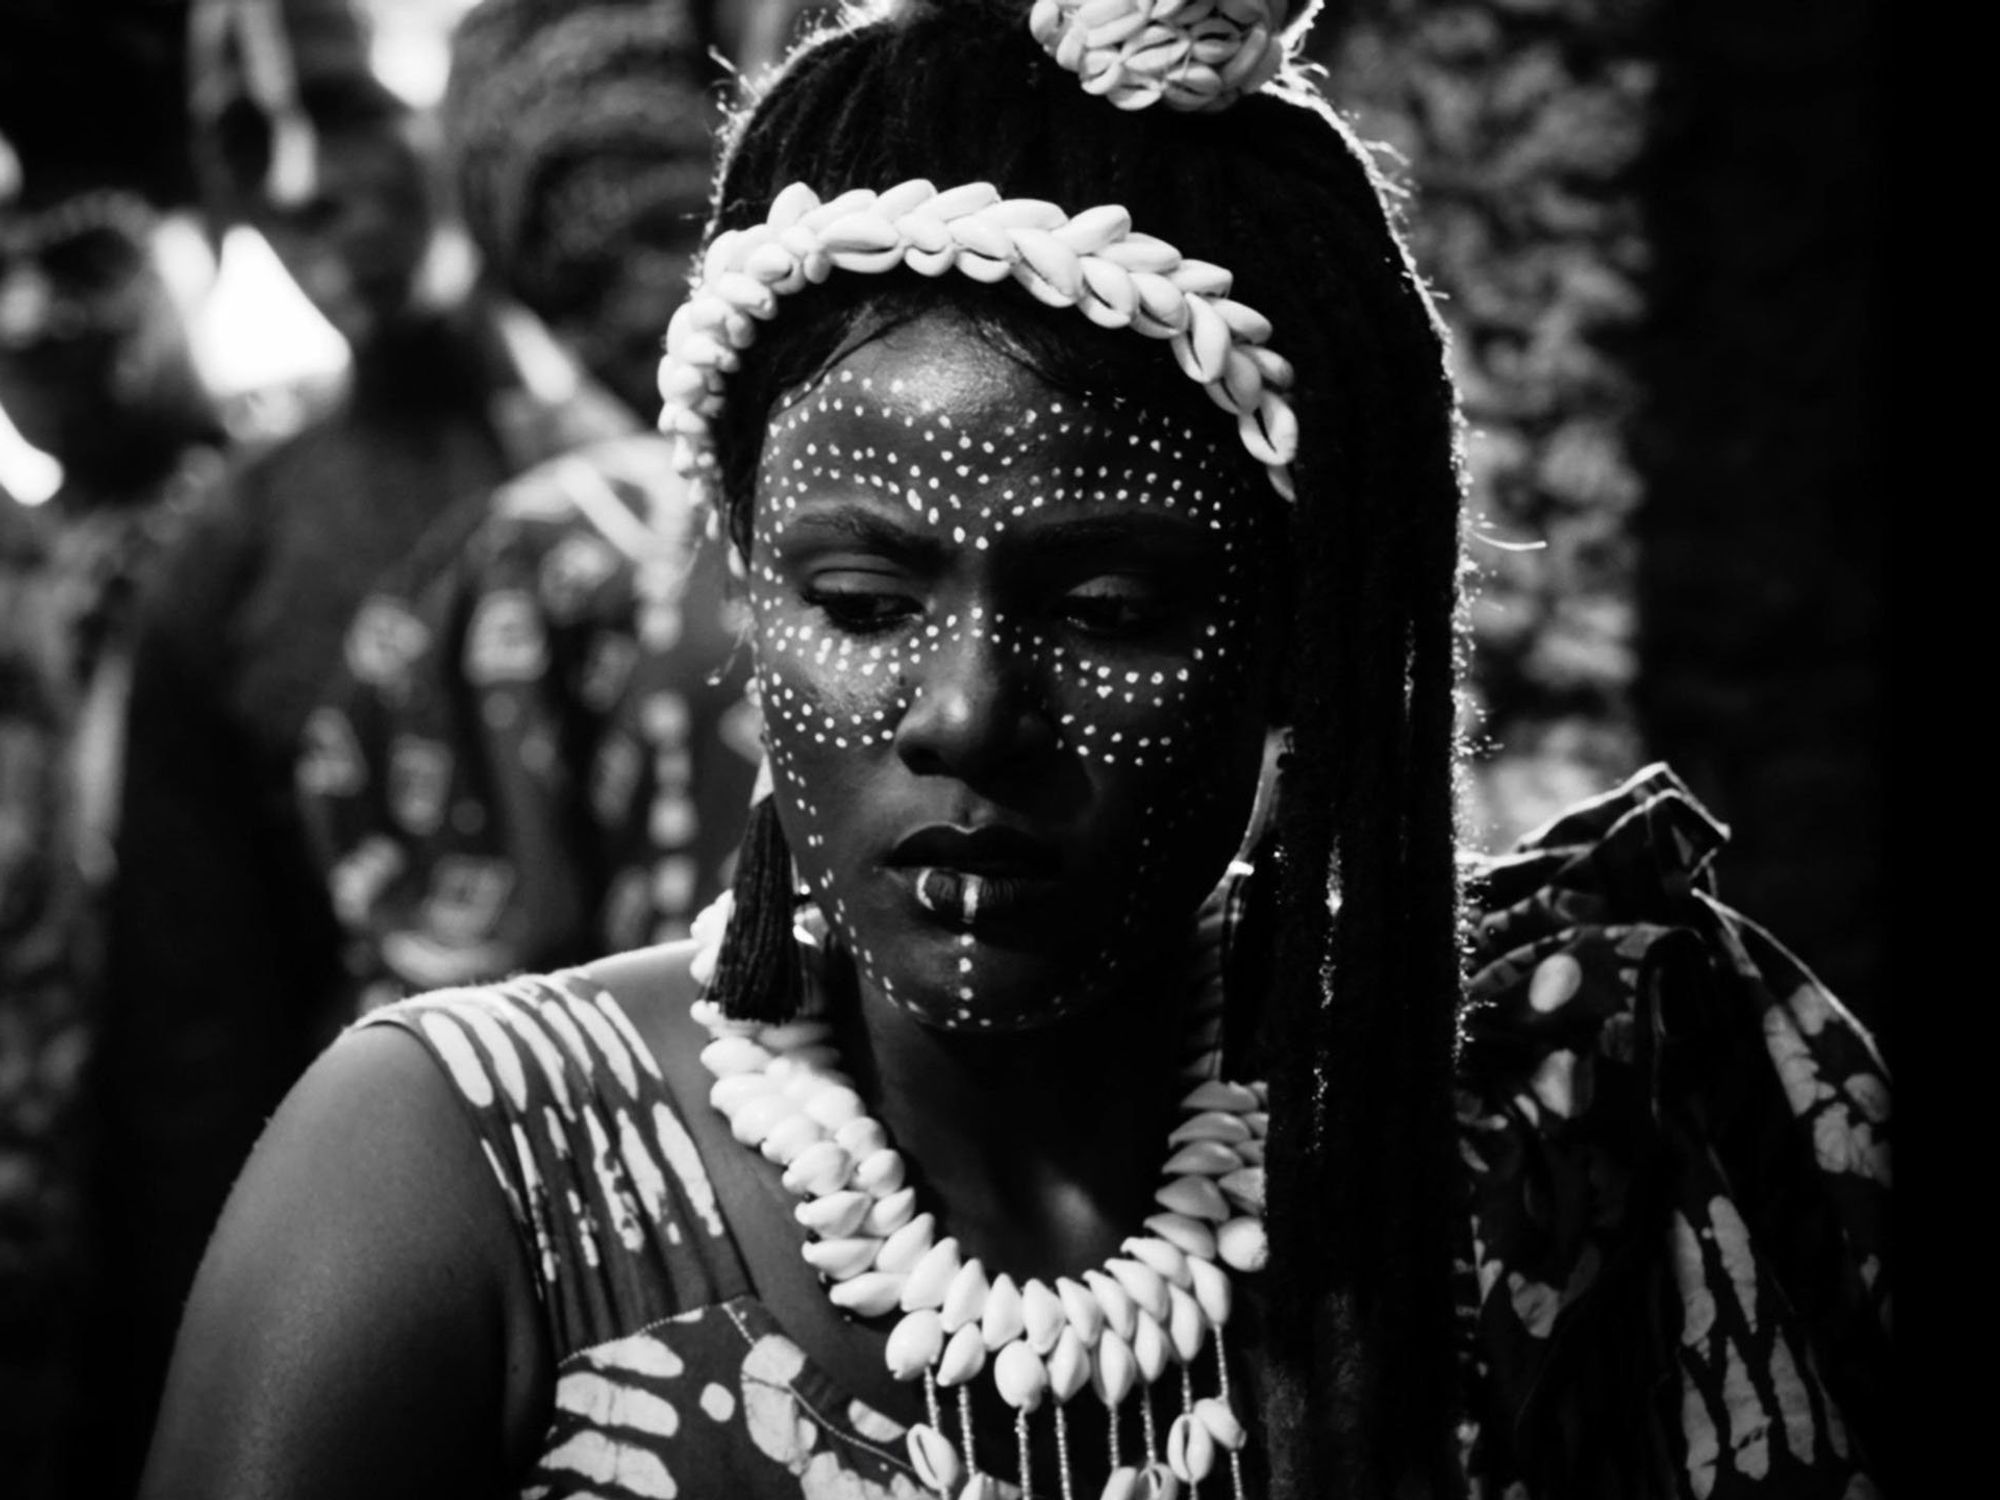 A black and white still from the film, Mami Wata, directed by CJ Obasi of a woman with Yoruba face paint on, looking with her eyes downcast.